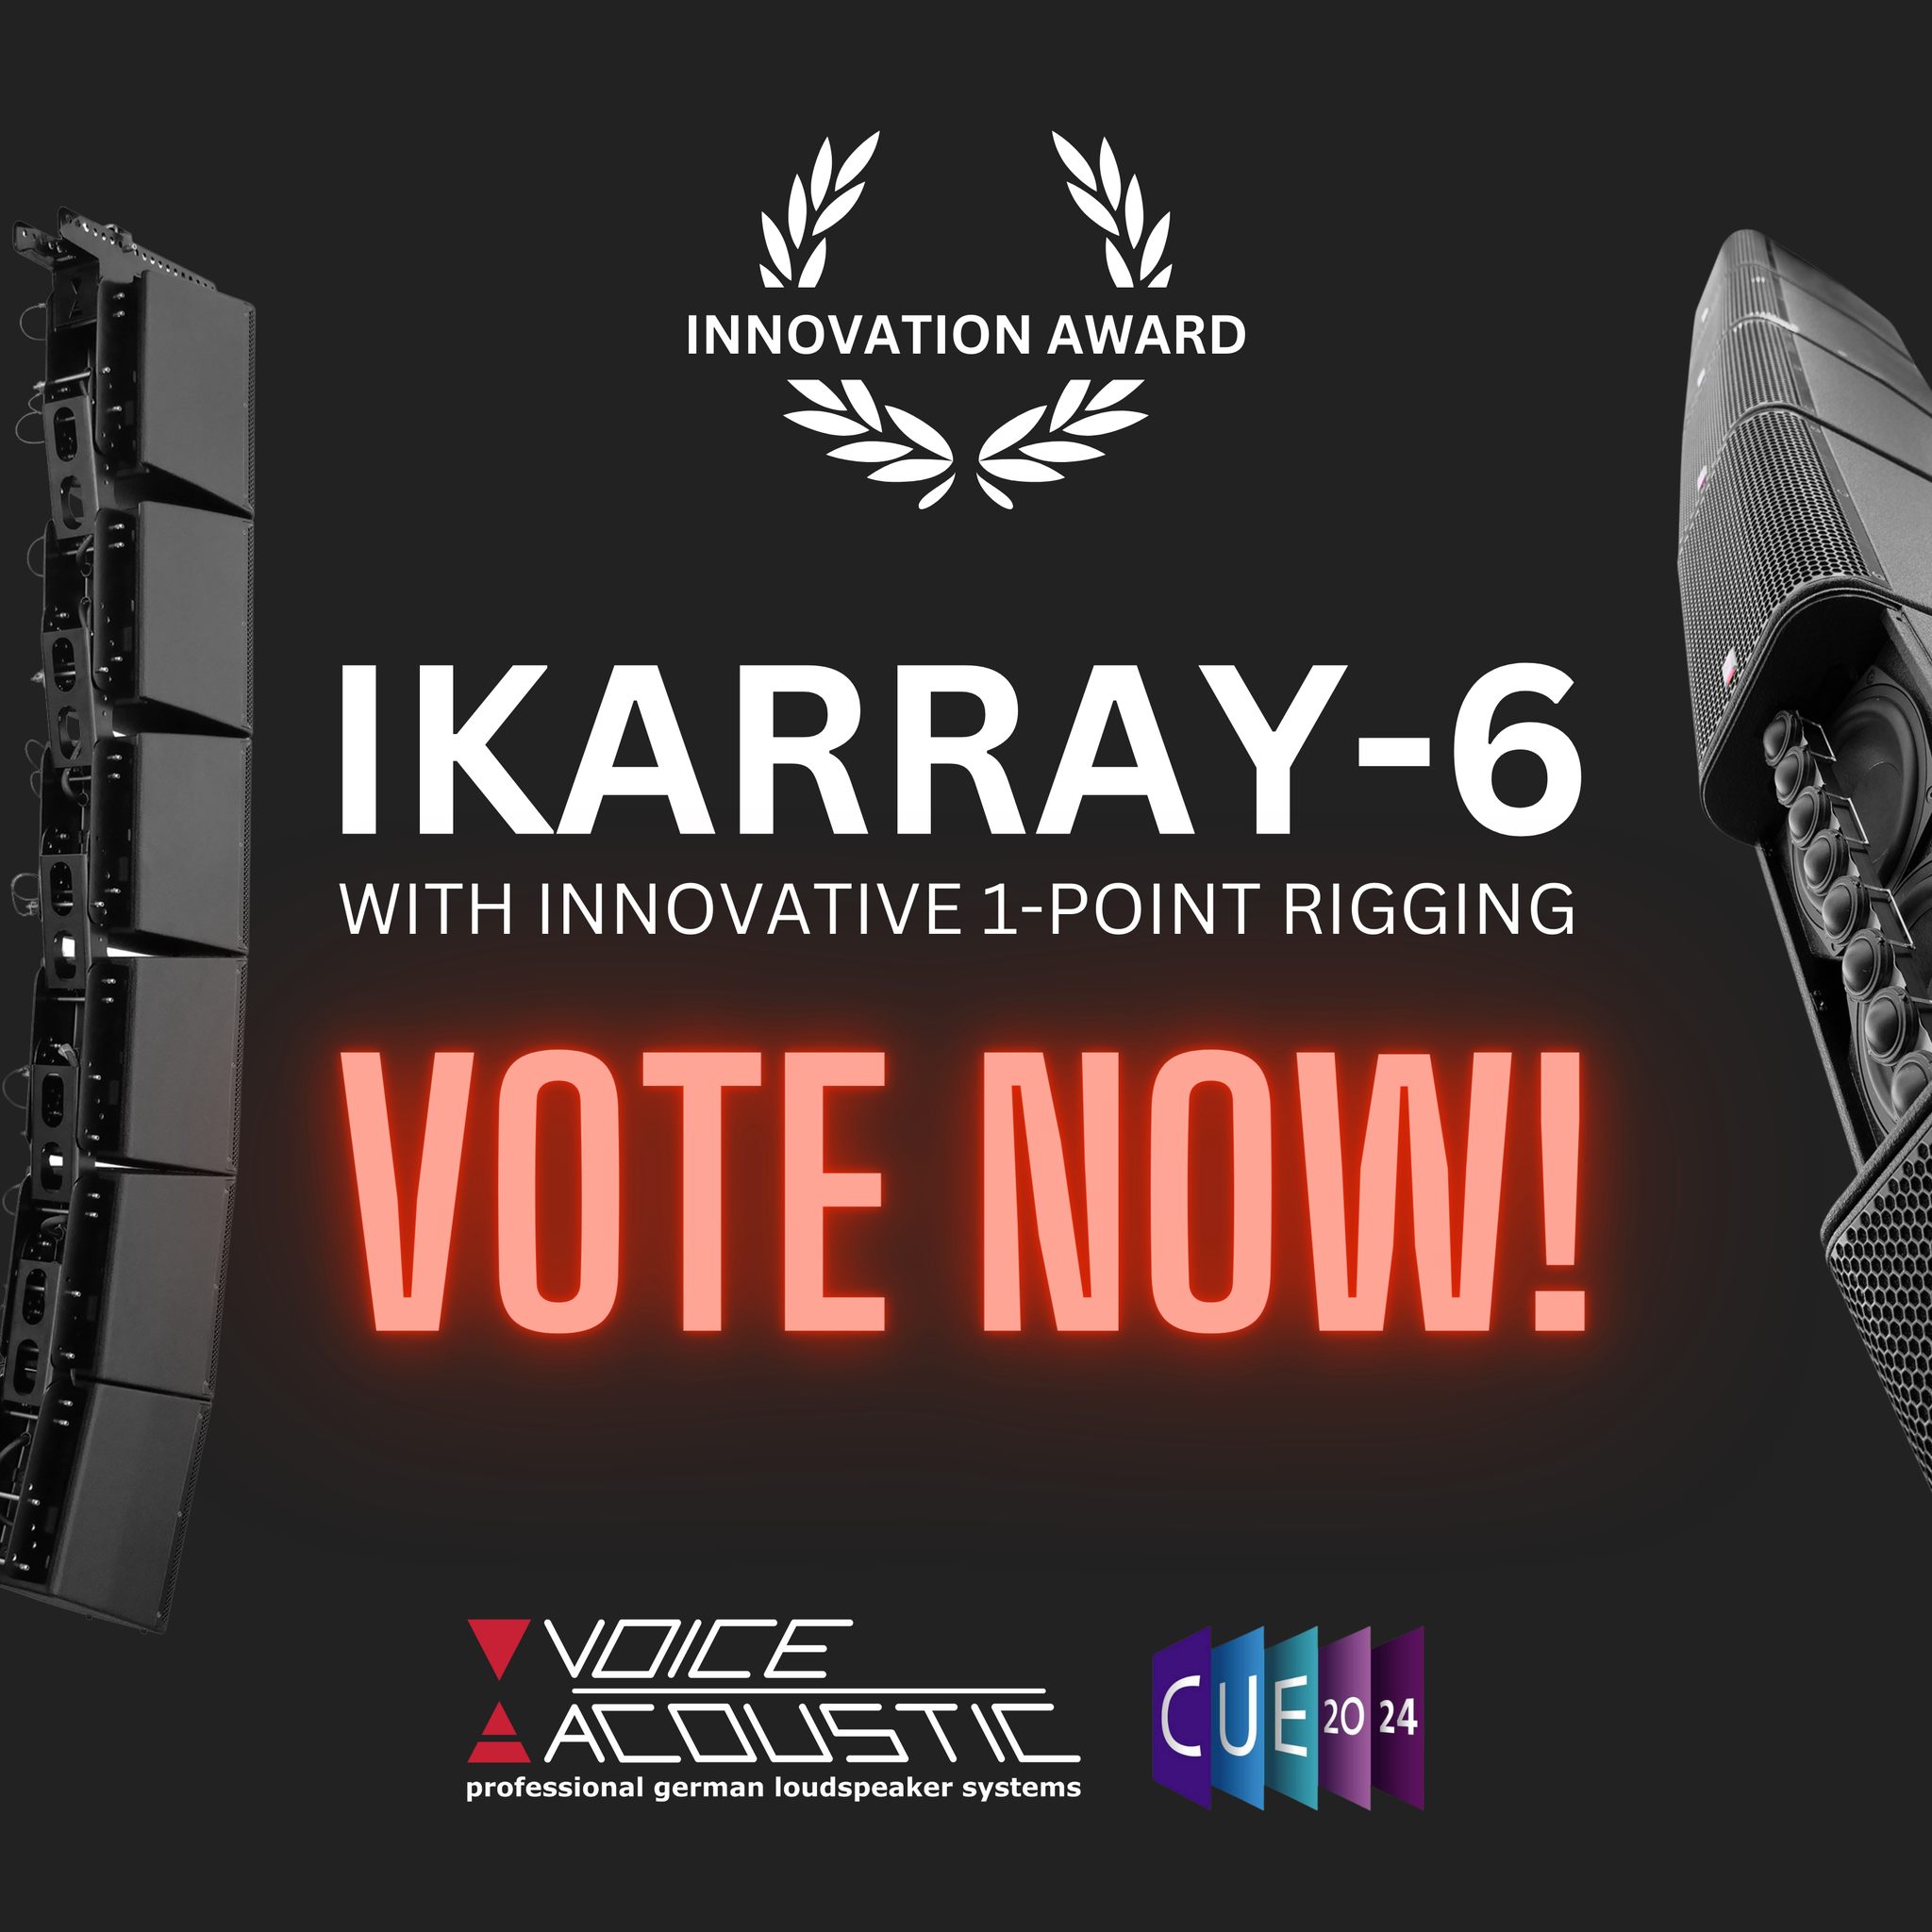 Voice-Acoustic is nominated! - Voice-Acoustic Ikarray-6 has been nominated for the CUE Innovation Audience Award!